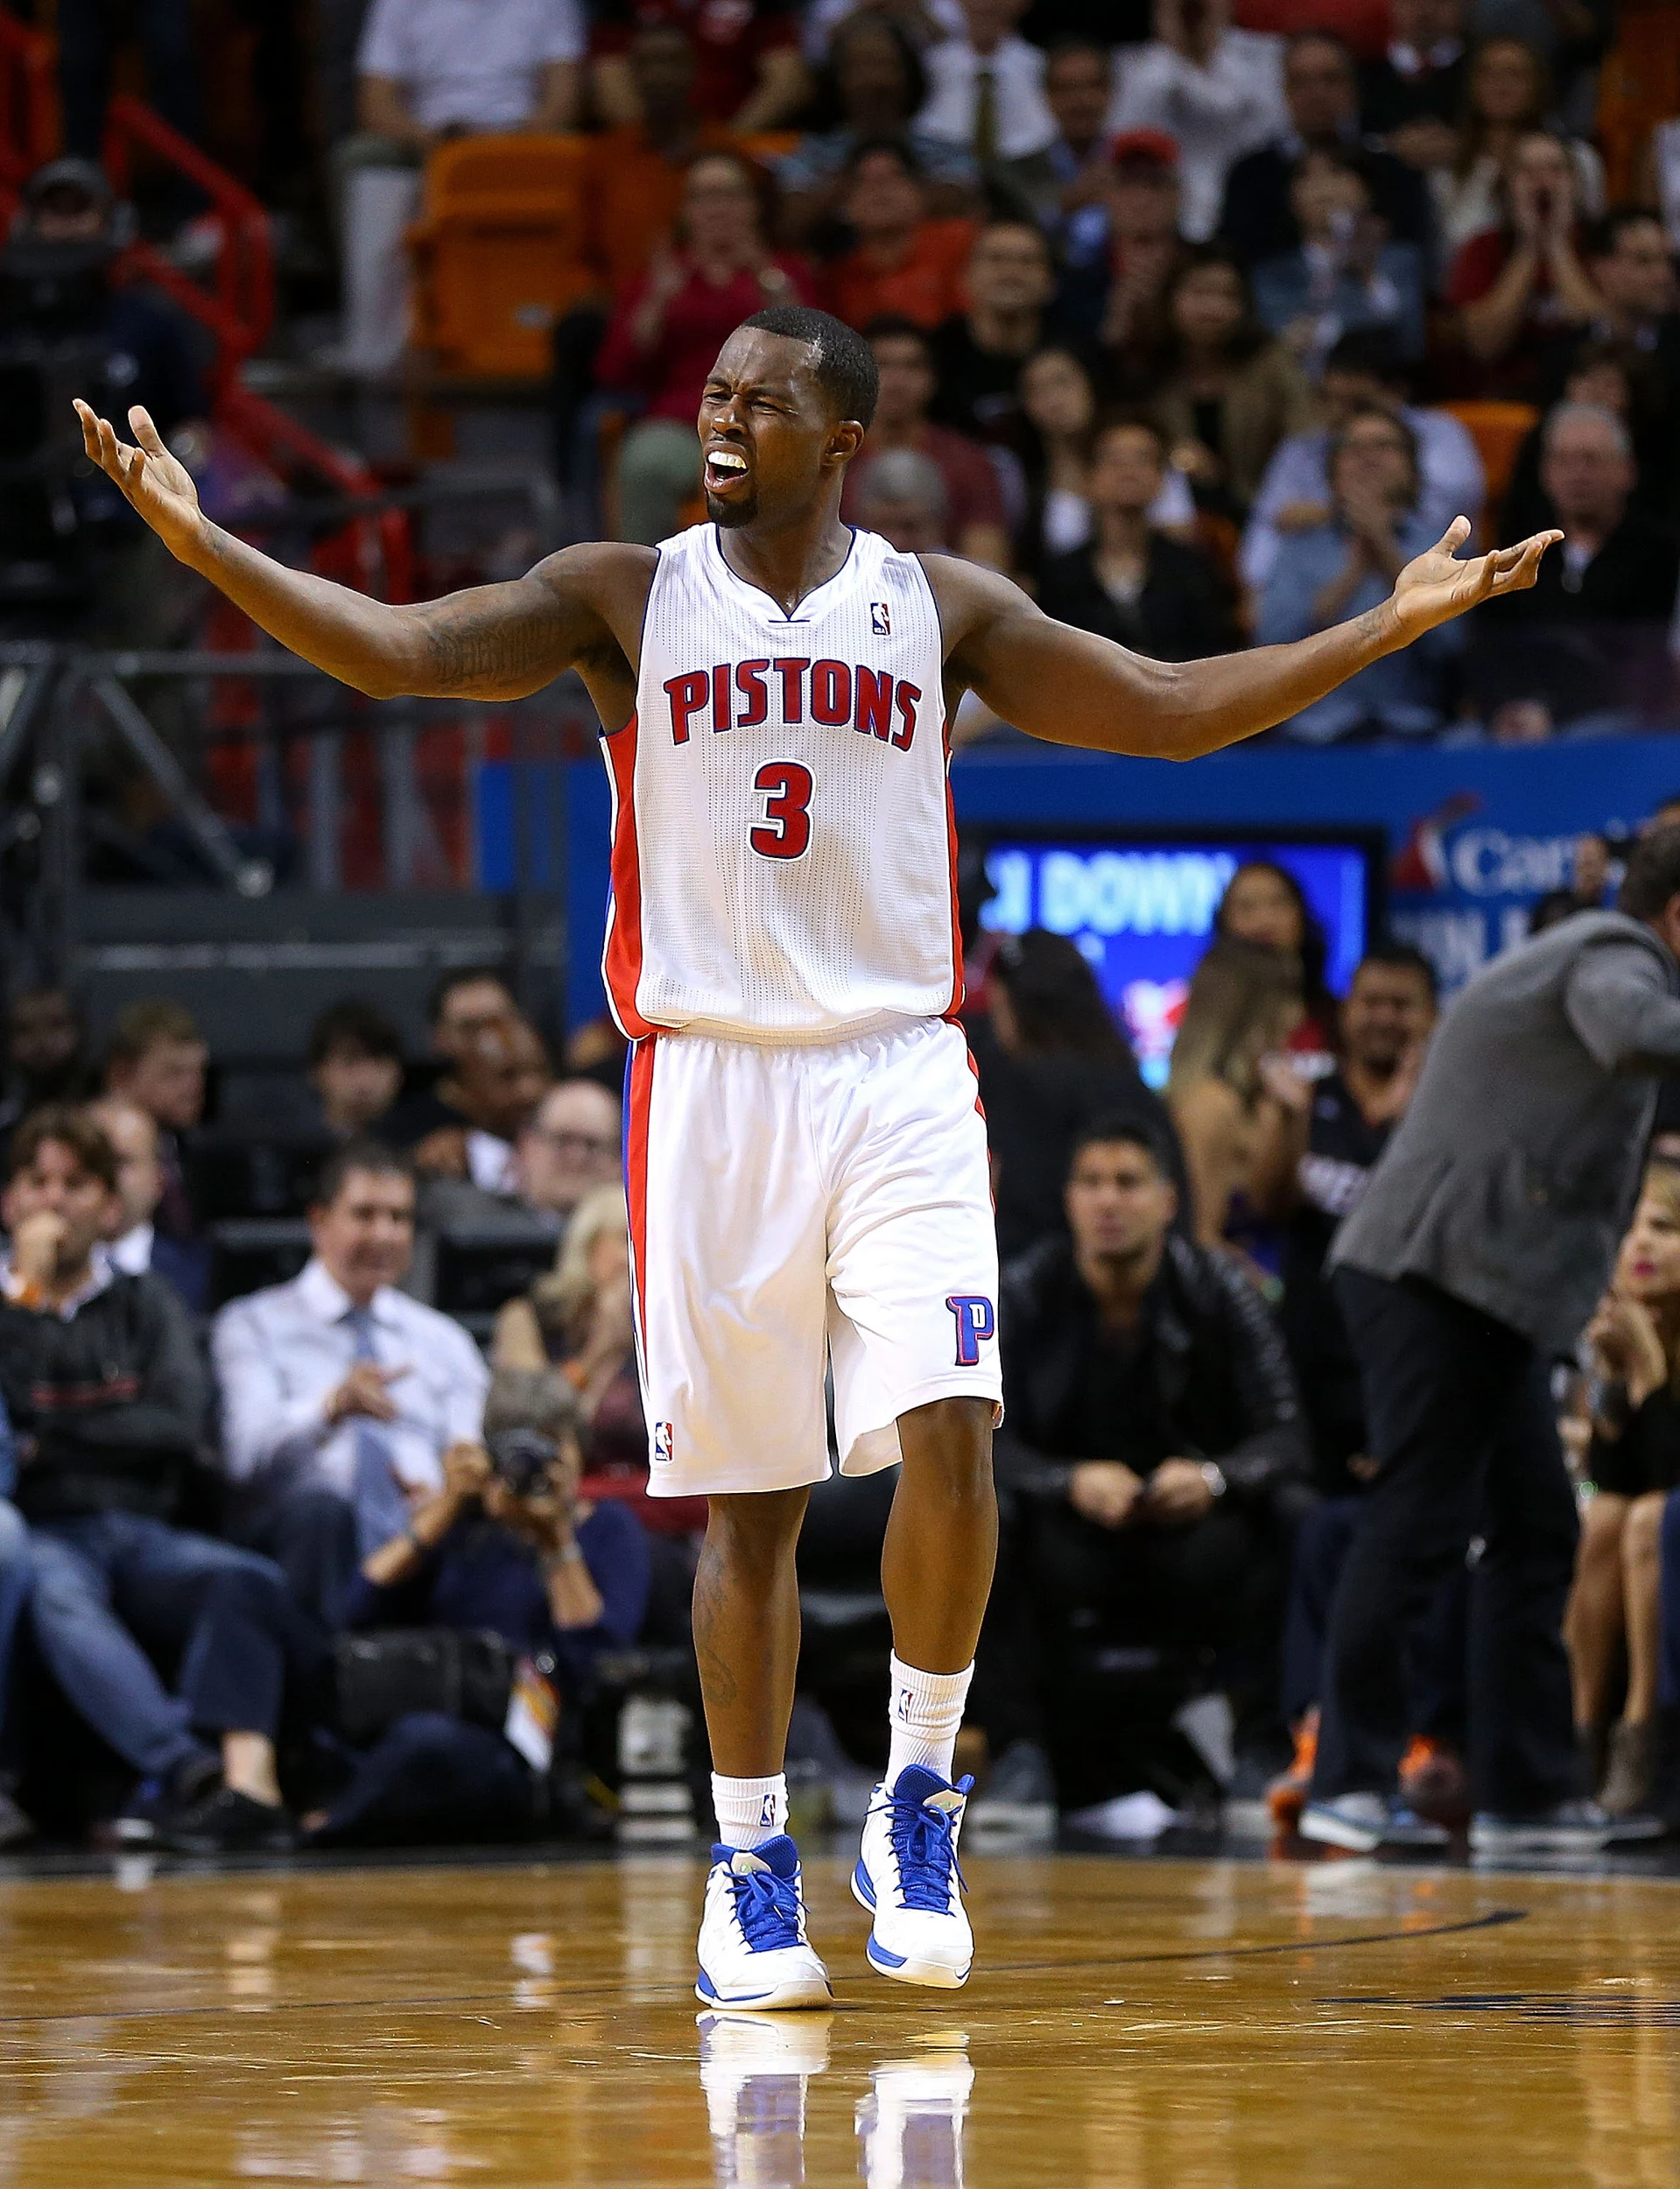 Tim Staudt Commentary: The Pistons and the trade deadline